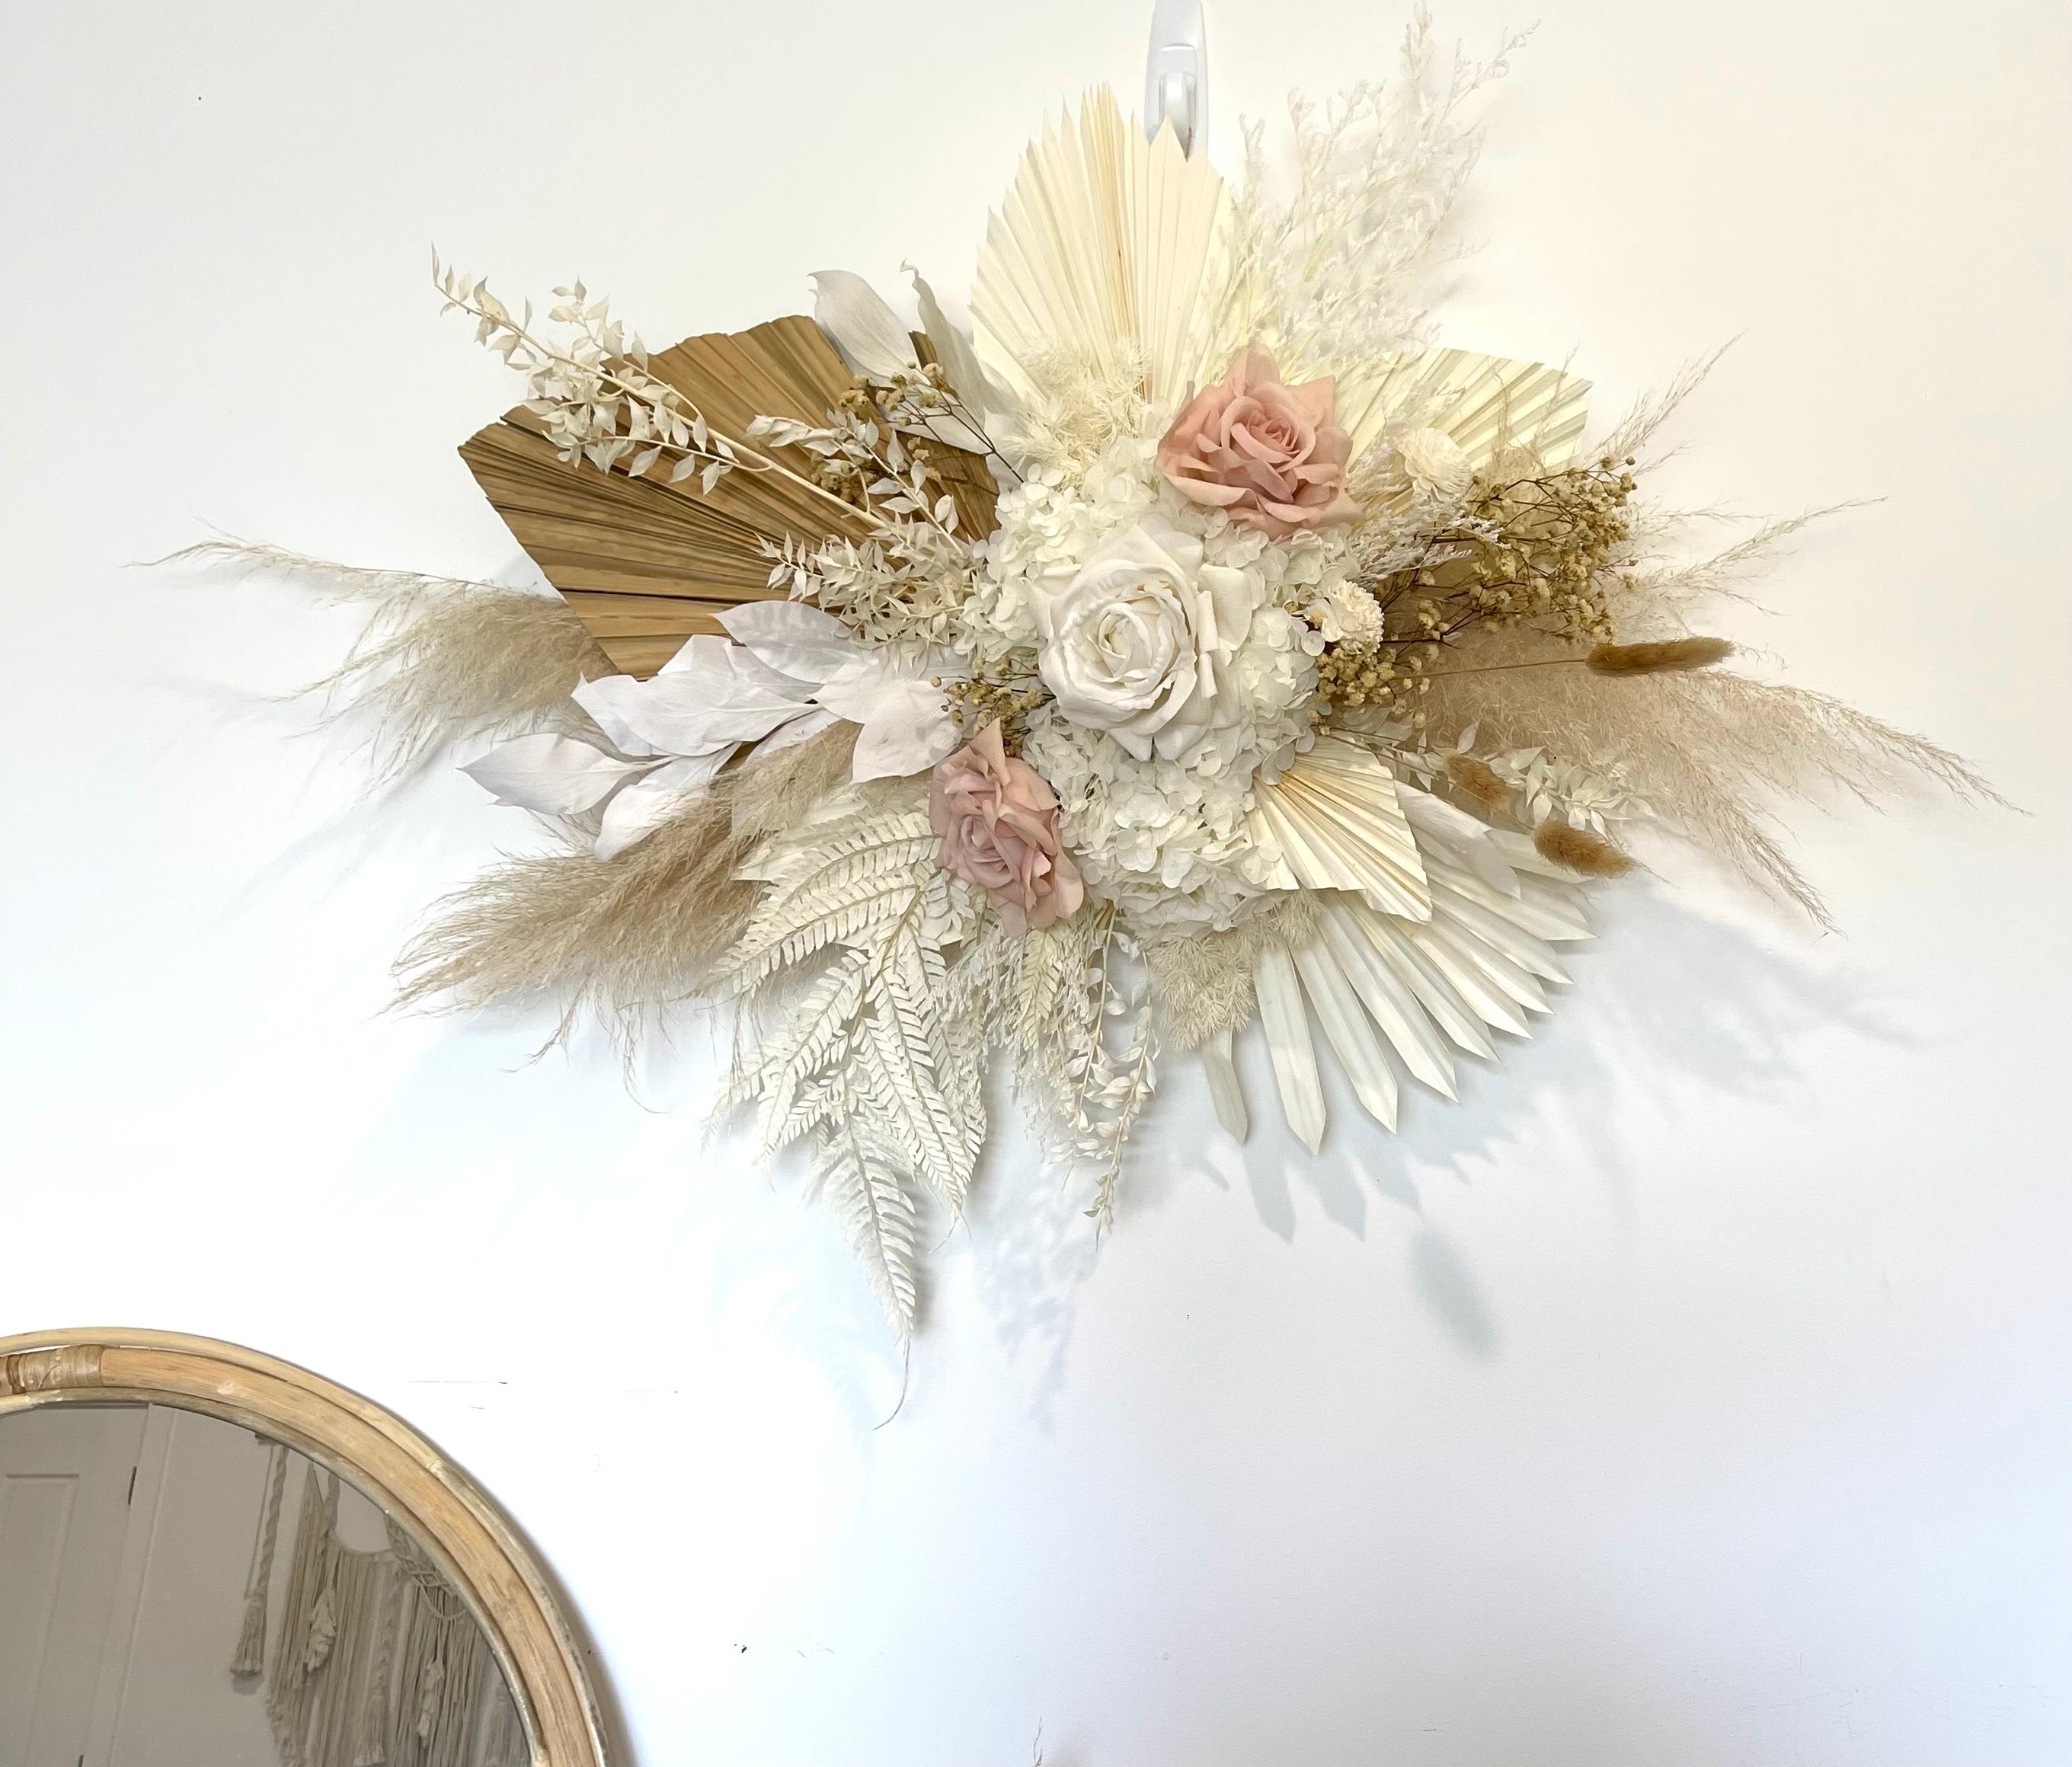 Everlasting rose/dried floral wall piece -small/medium.